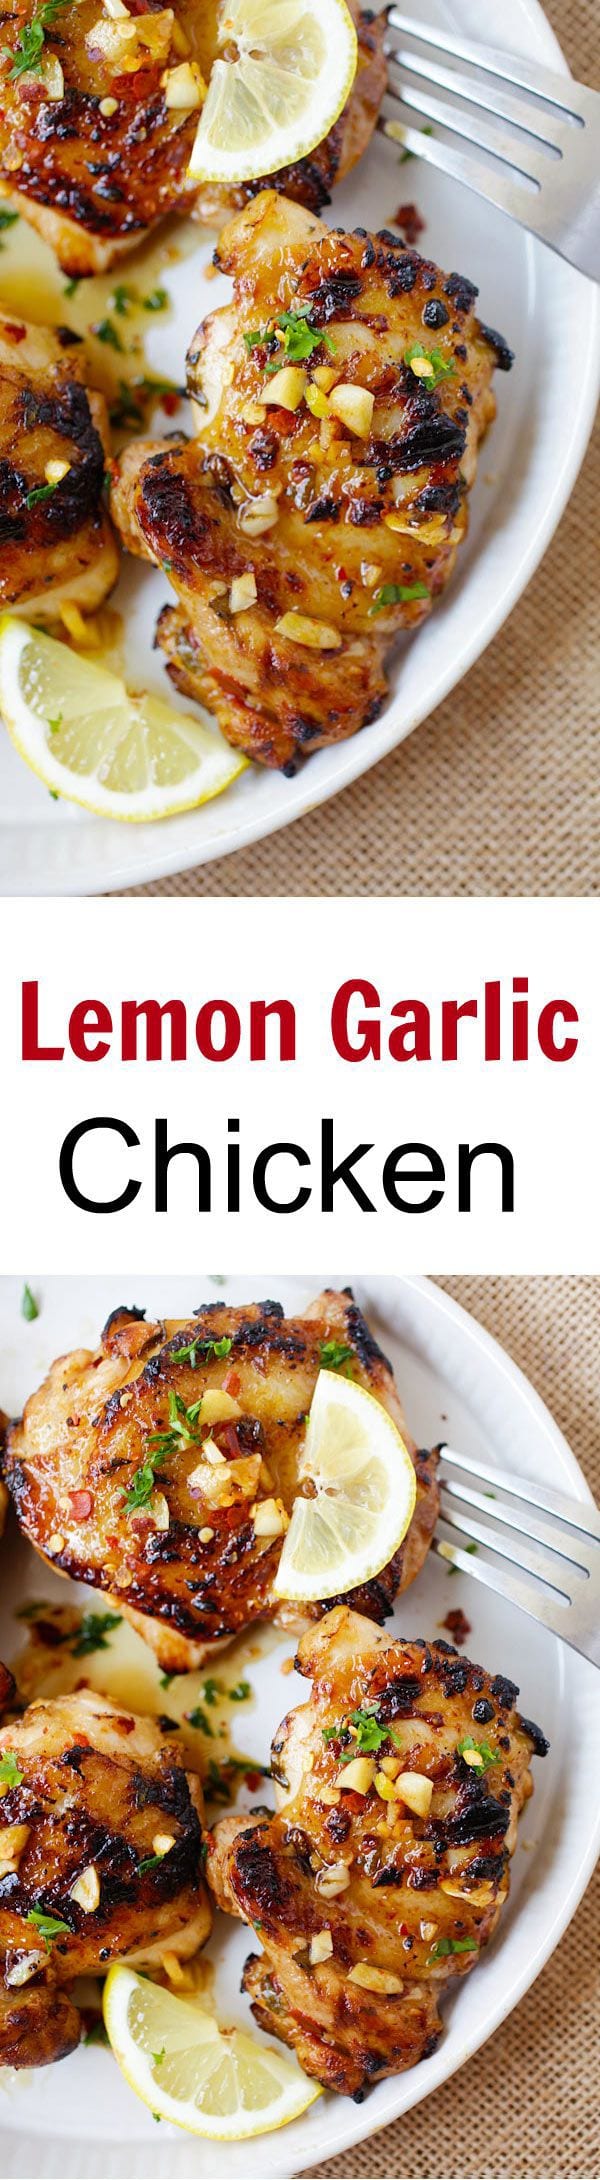 Lemon Garlic chicken – juicy, moist and delicious chicken marinated with lemon and garlic and grill to perfection. So easy and so good! | rasamalaysia.com